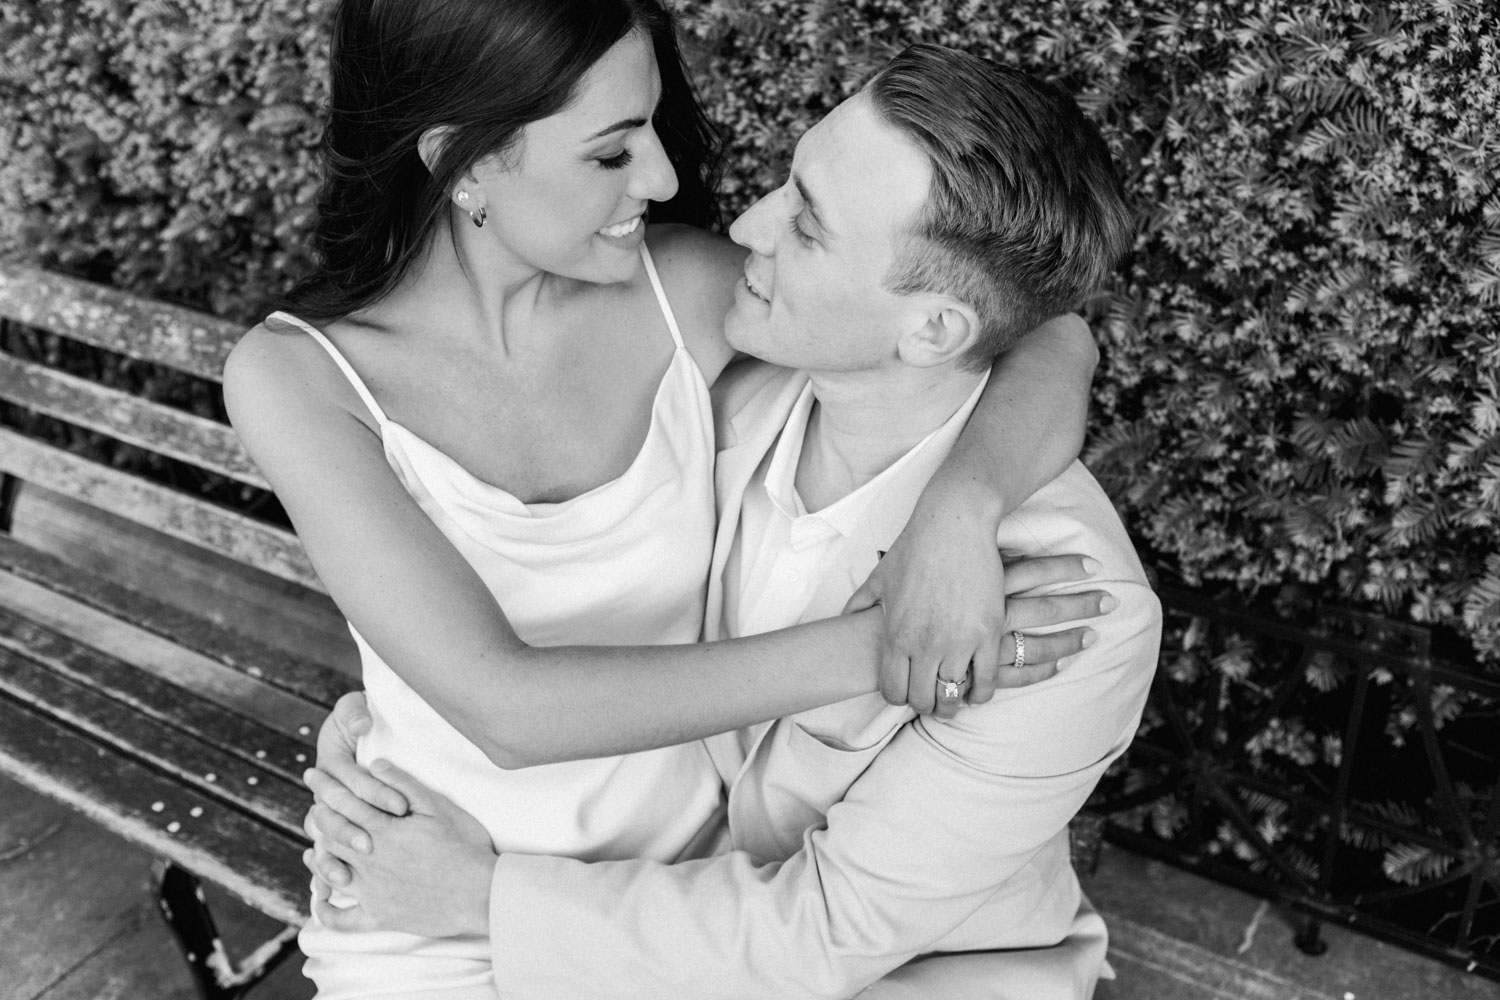 A black and white engagement photo in a downtown Chicago garden